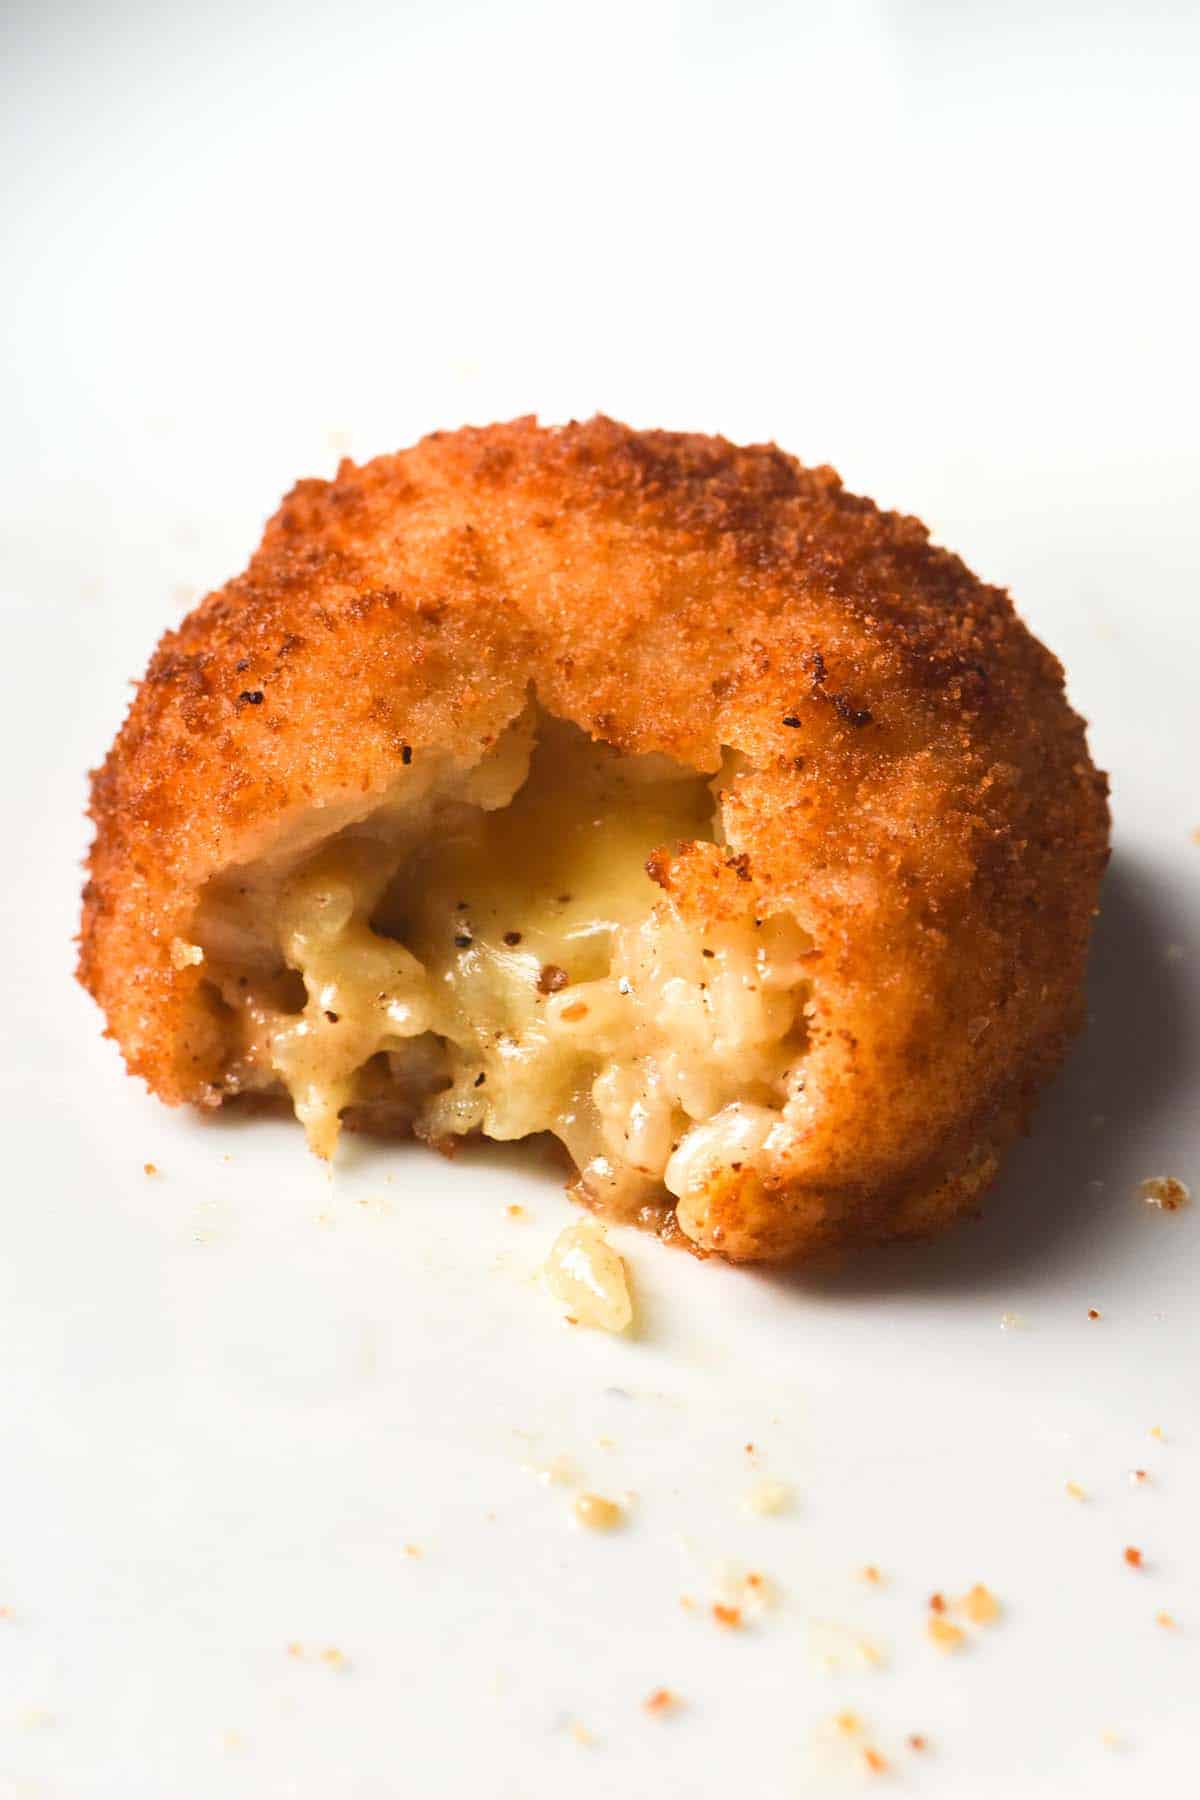 A close up image of a gluten free arancini on a white place. The arancini has been torn, revealing the molten mozzarella inside. 